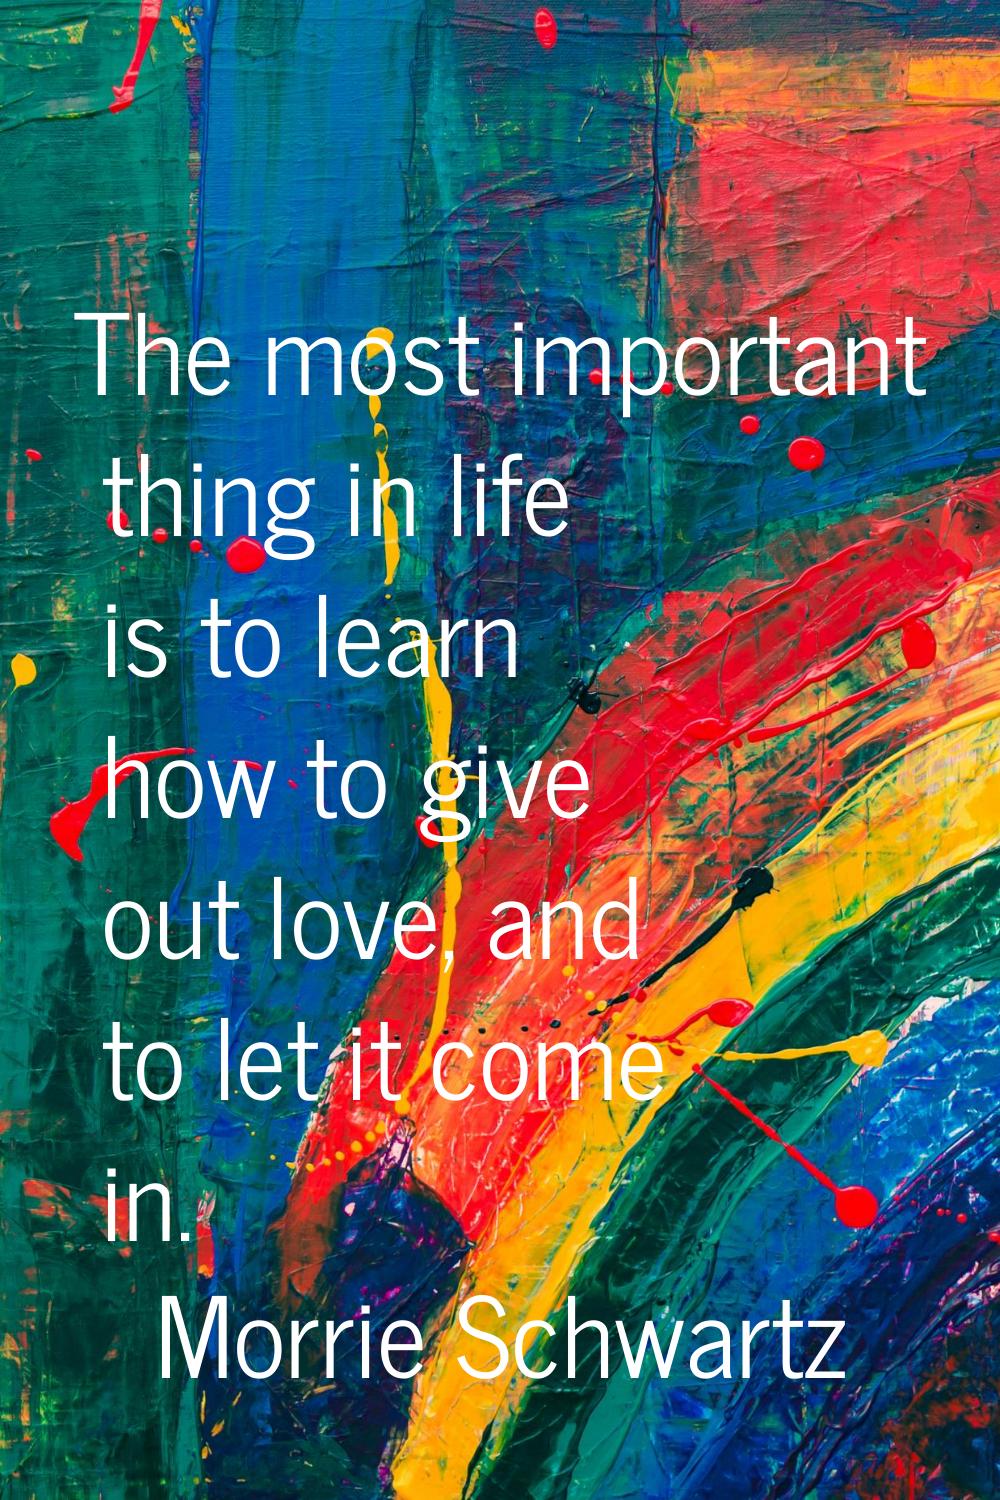 The most important thing in life is to learn how to give out love, and to let it come in.